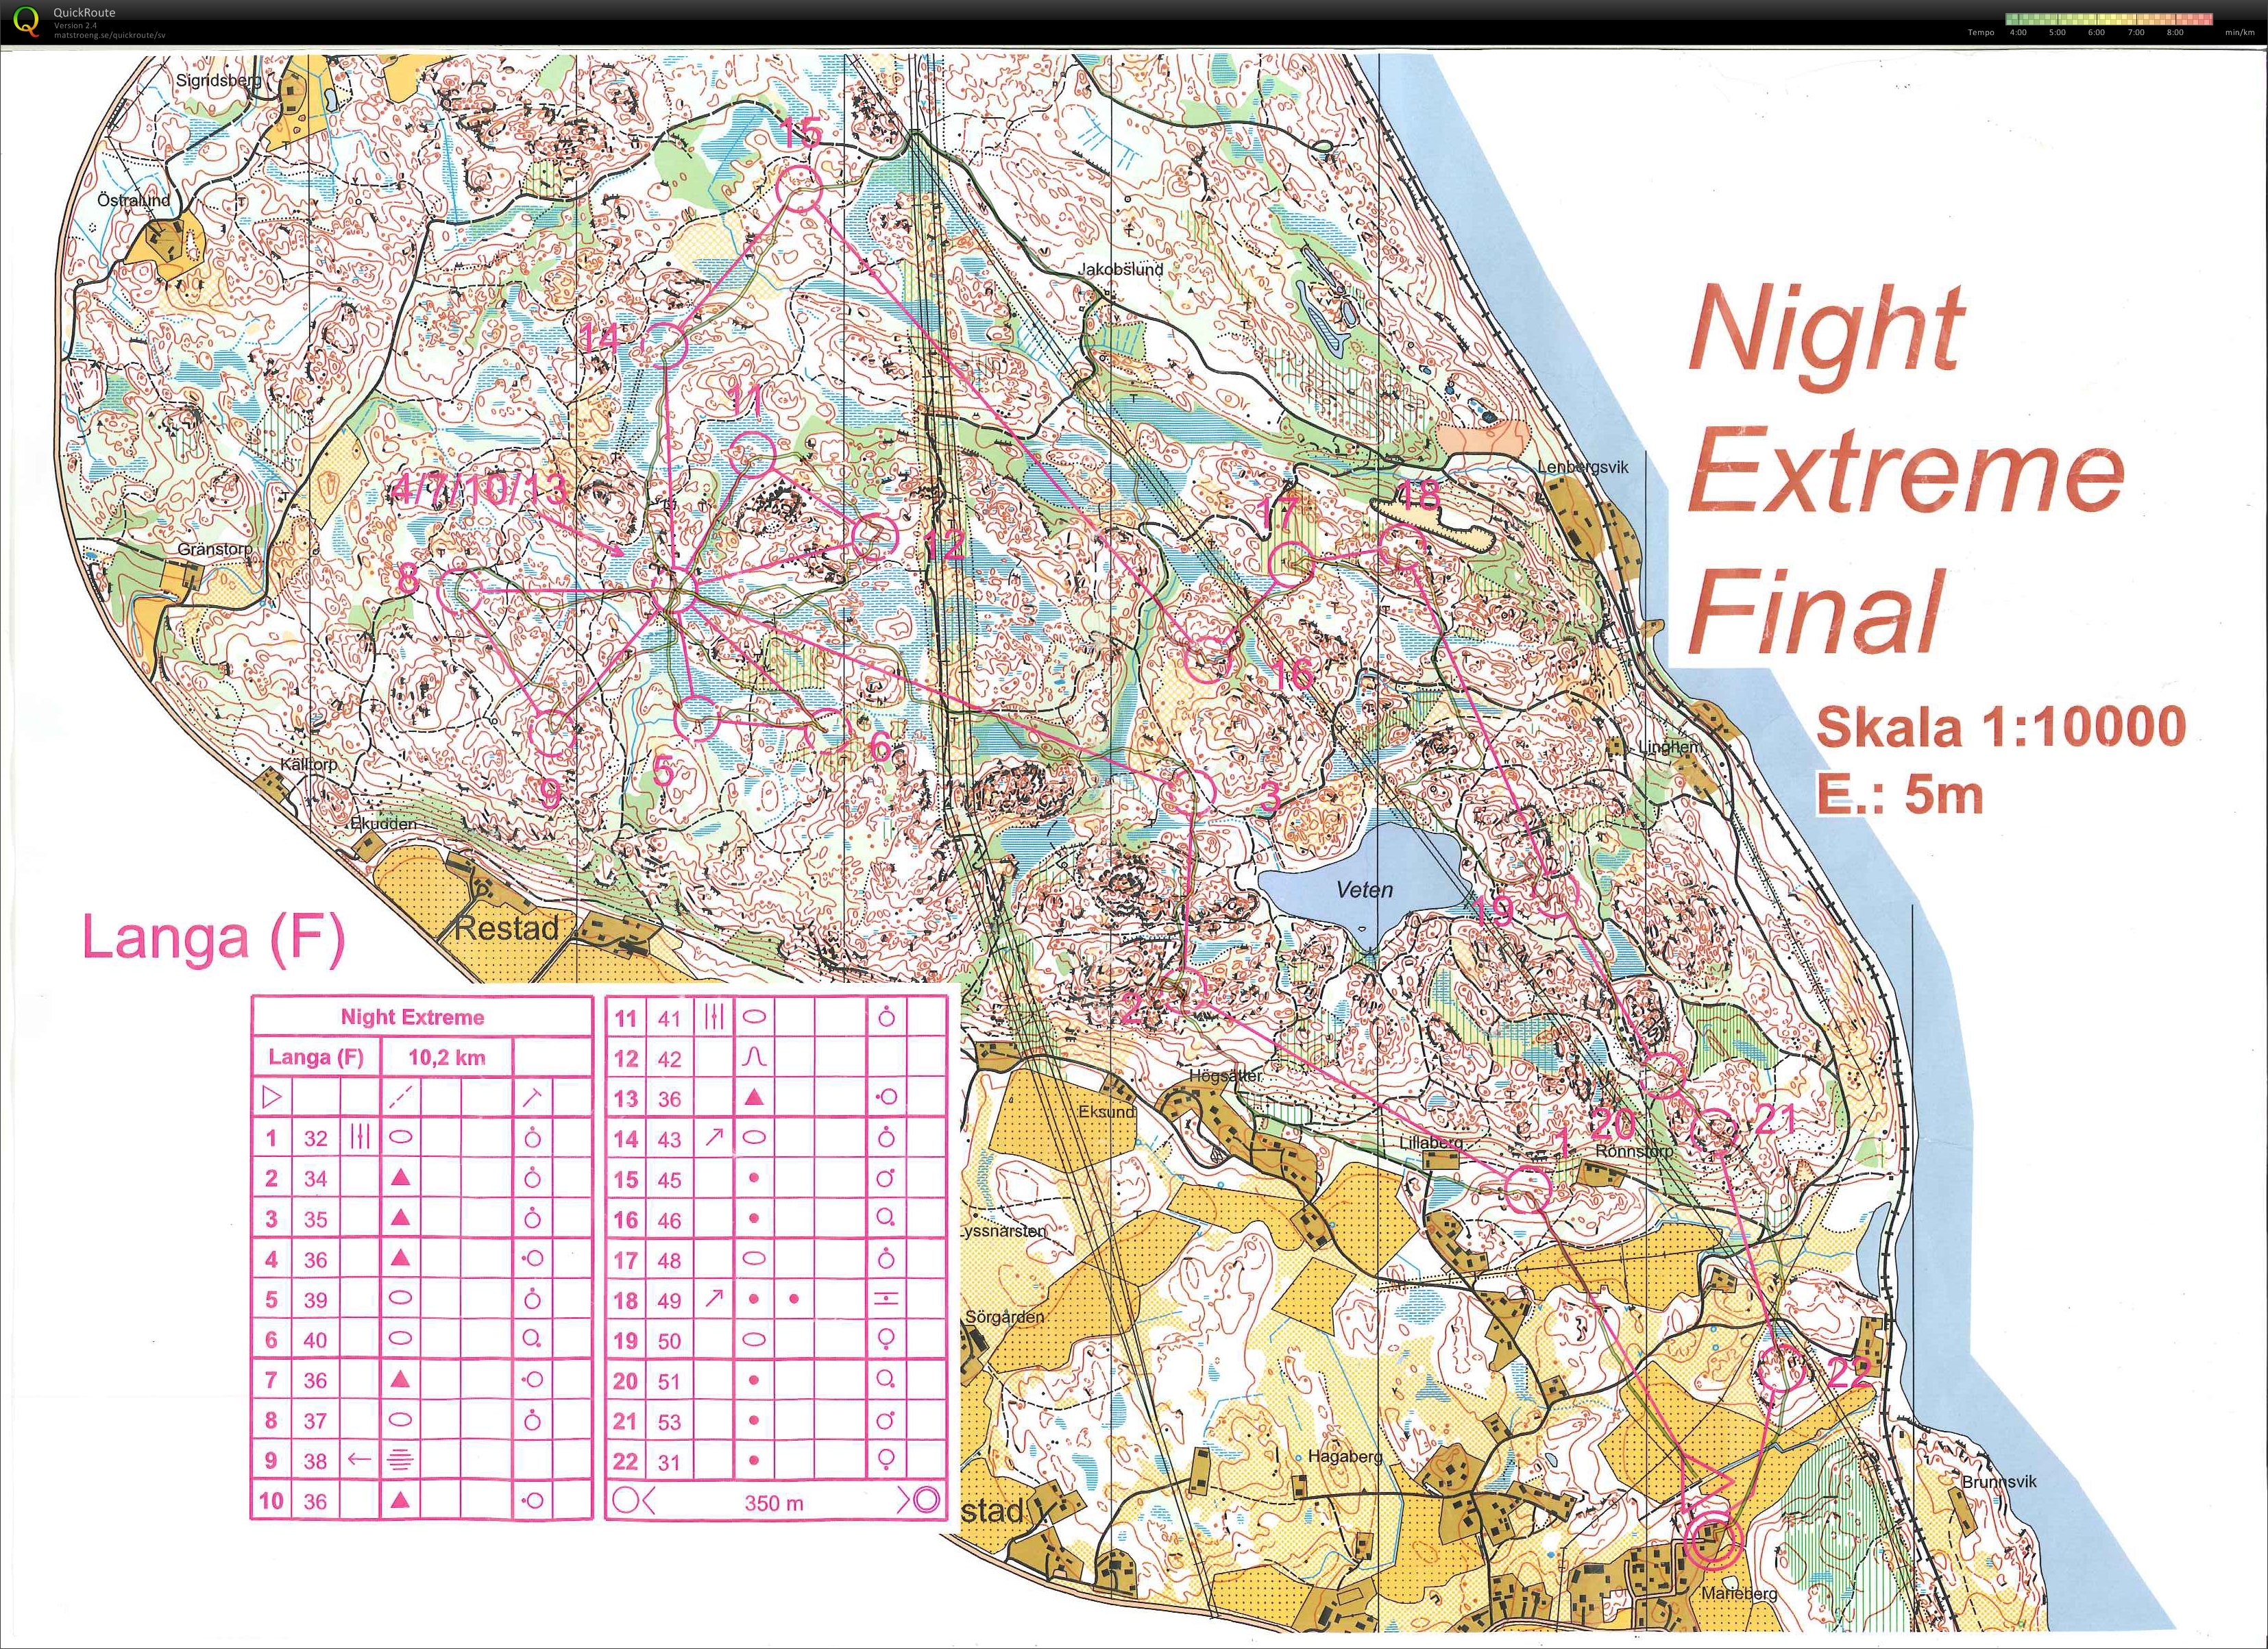 Night Extreme Final (13/03/2012)